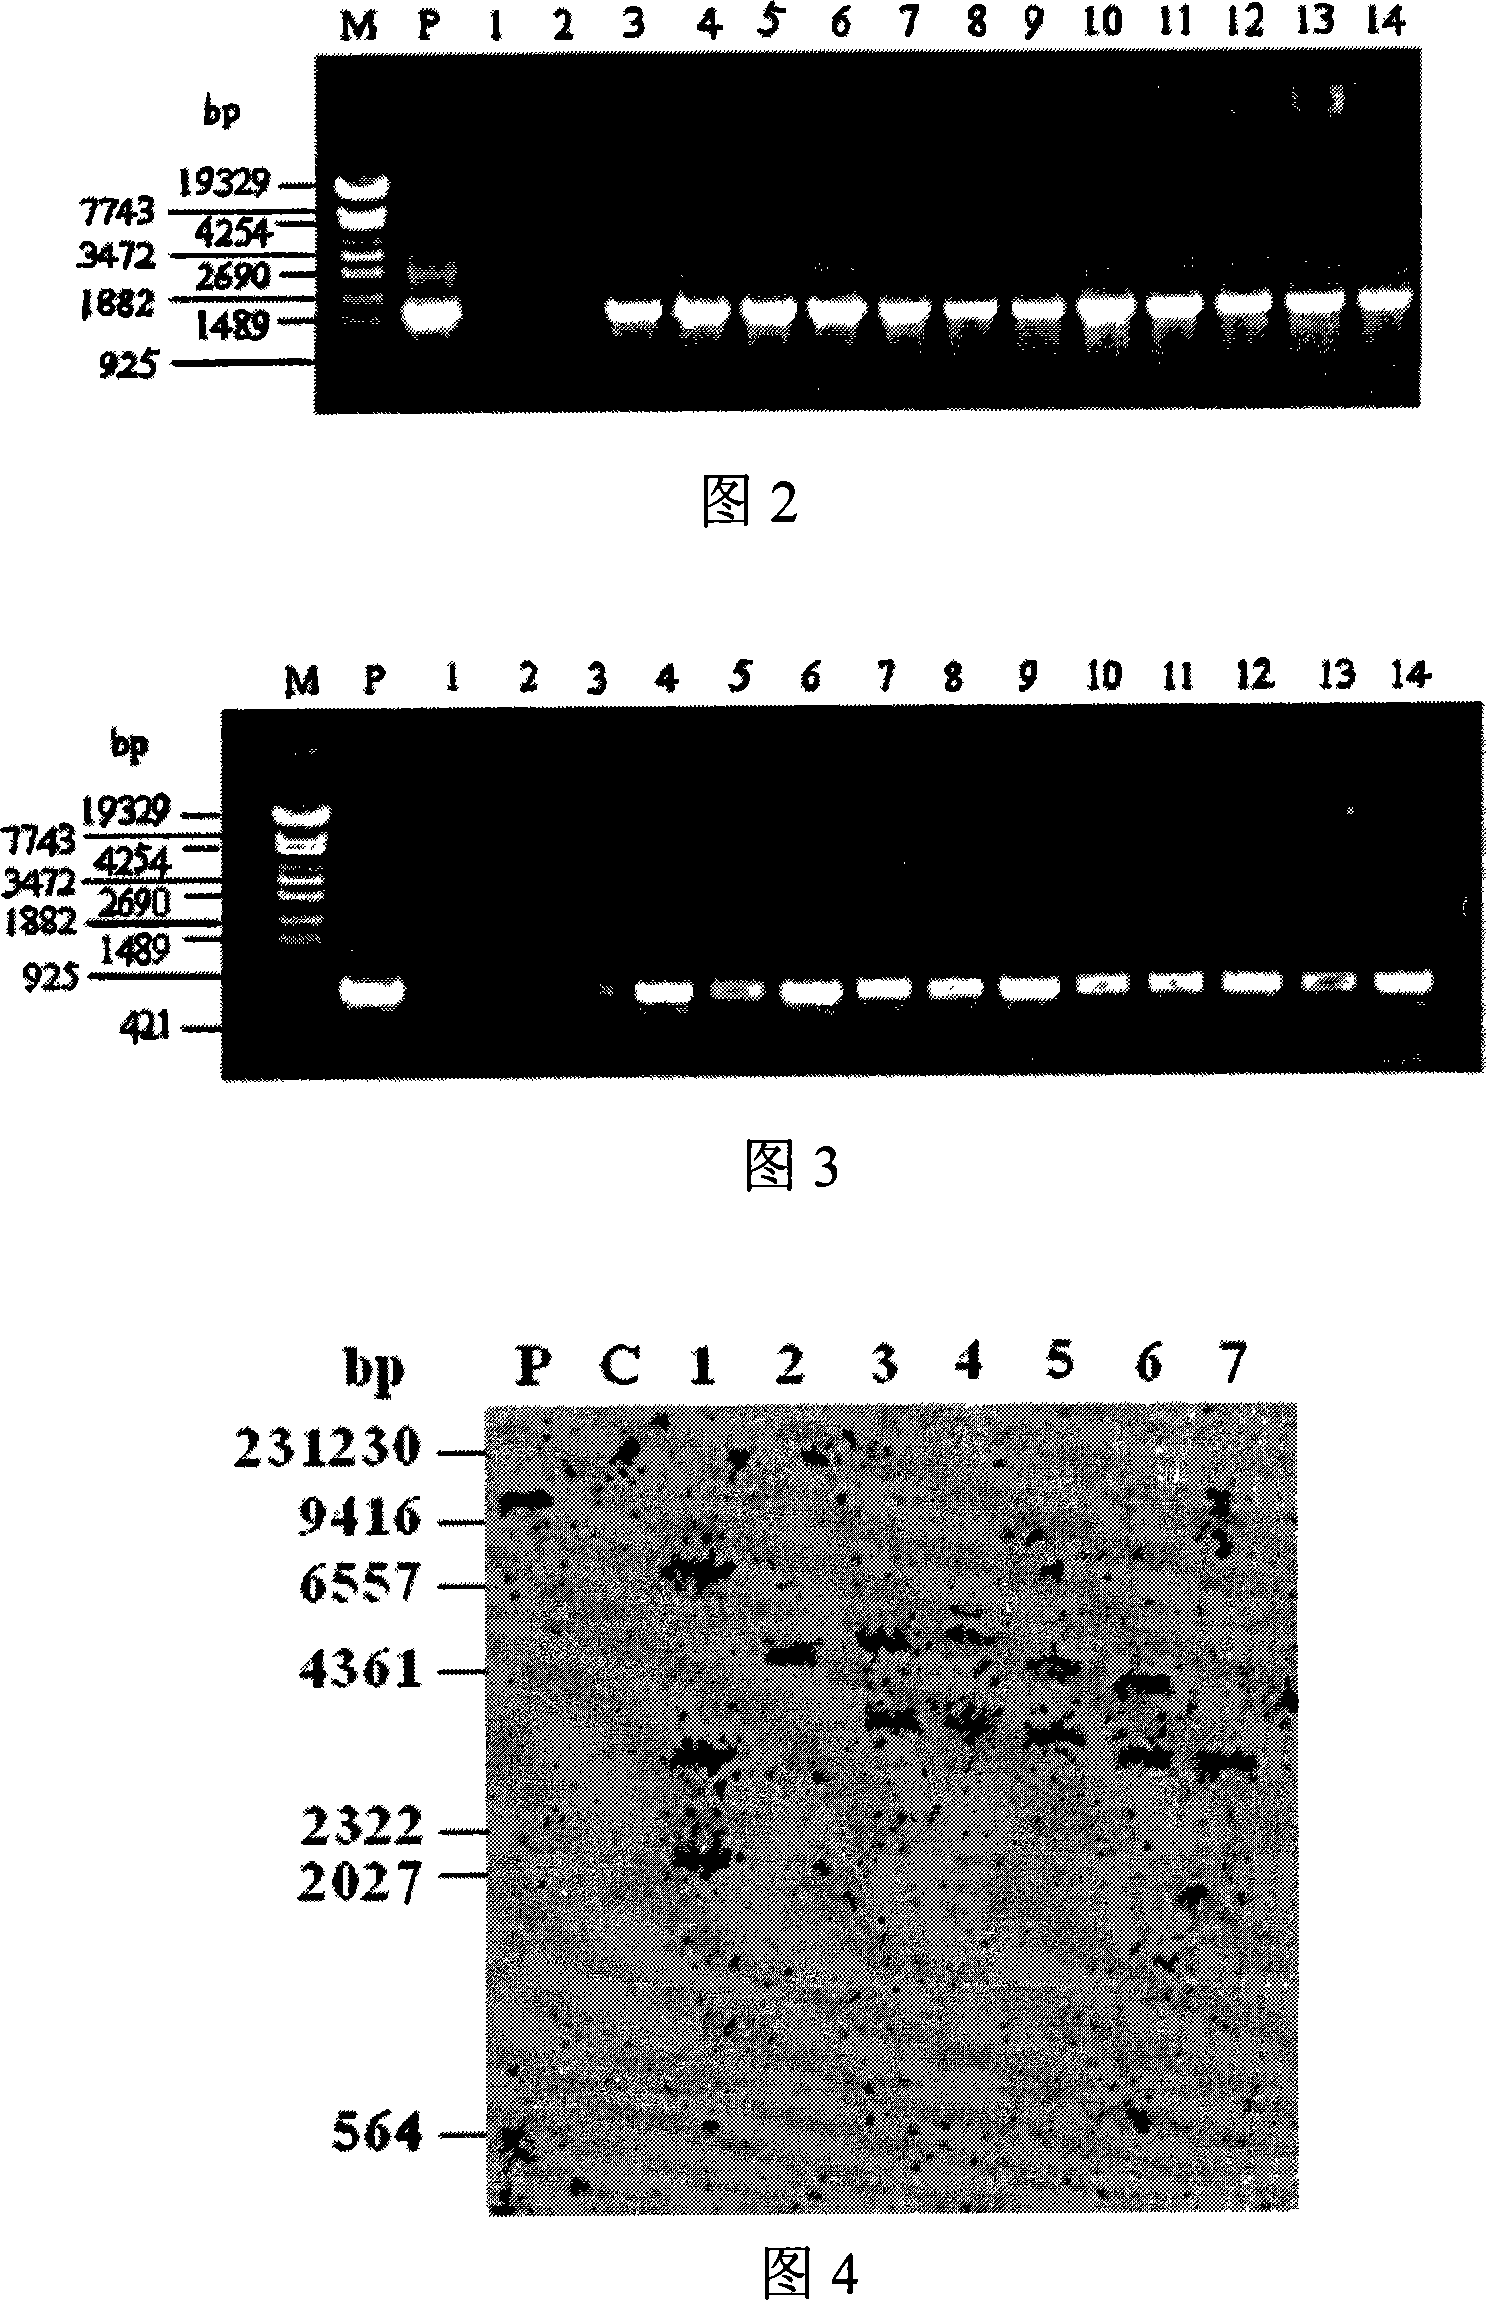 Method for carrying out agrobacterium tumefaciens mediated banana genes by employing liquid co-culture system